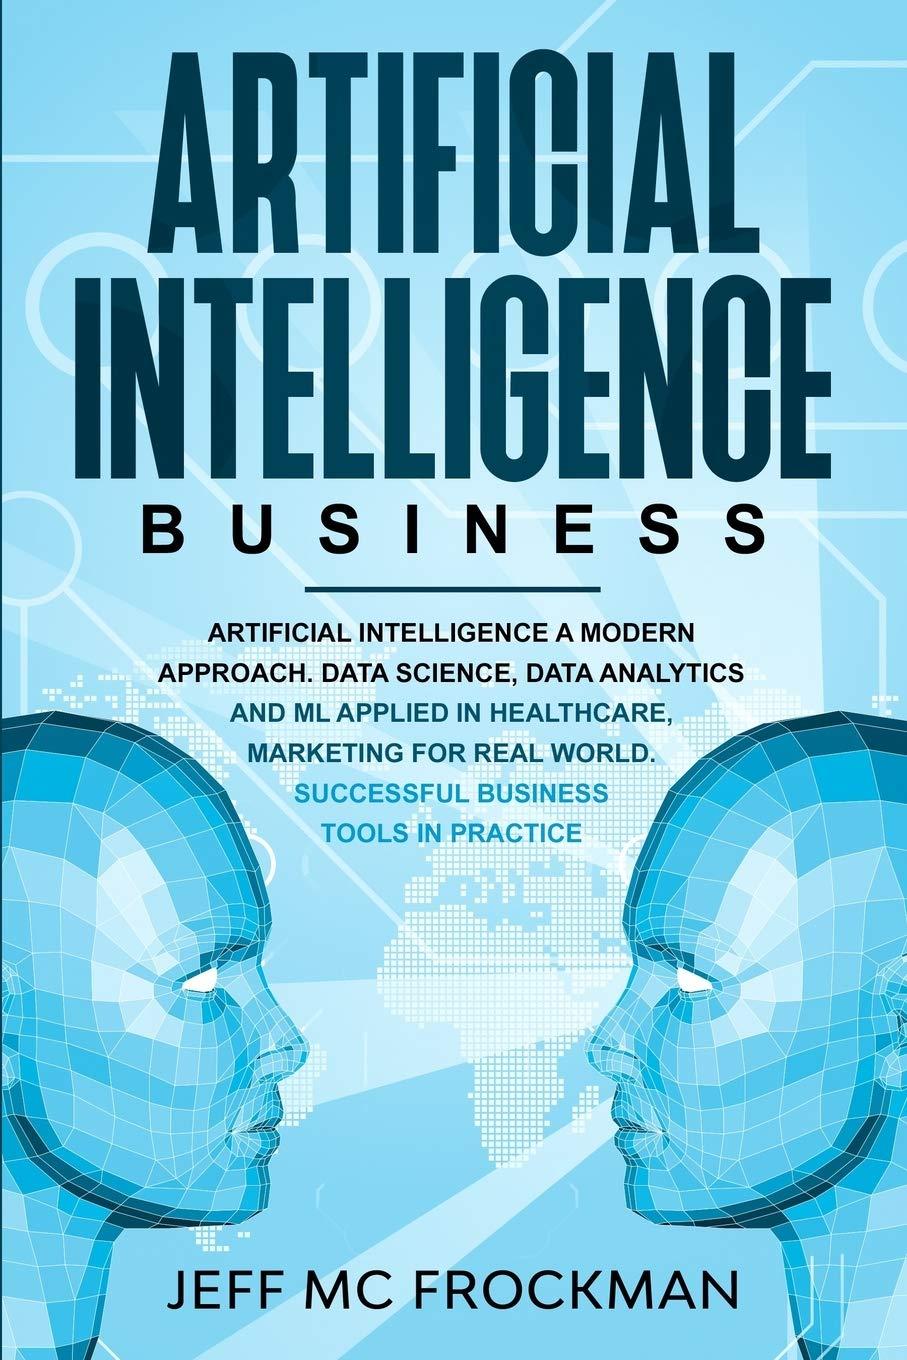 Artificial Intelligence Business Artificial Intelligence A Modern Approach Data Science Data Analytics And ML Applied In Healthcare Marketing For Real World Successful Business Tools In Practice